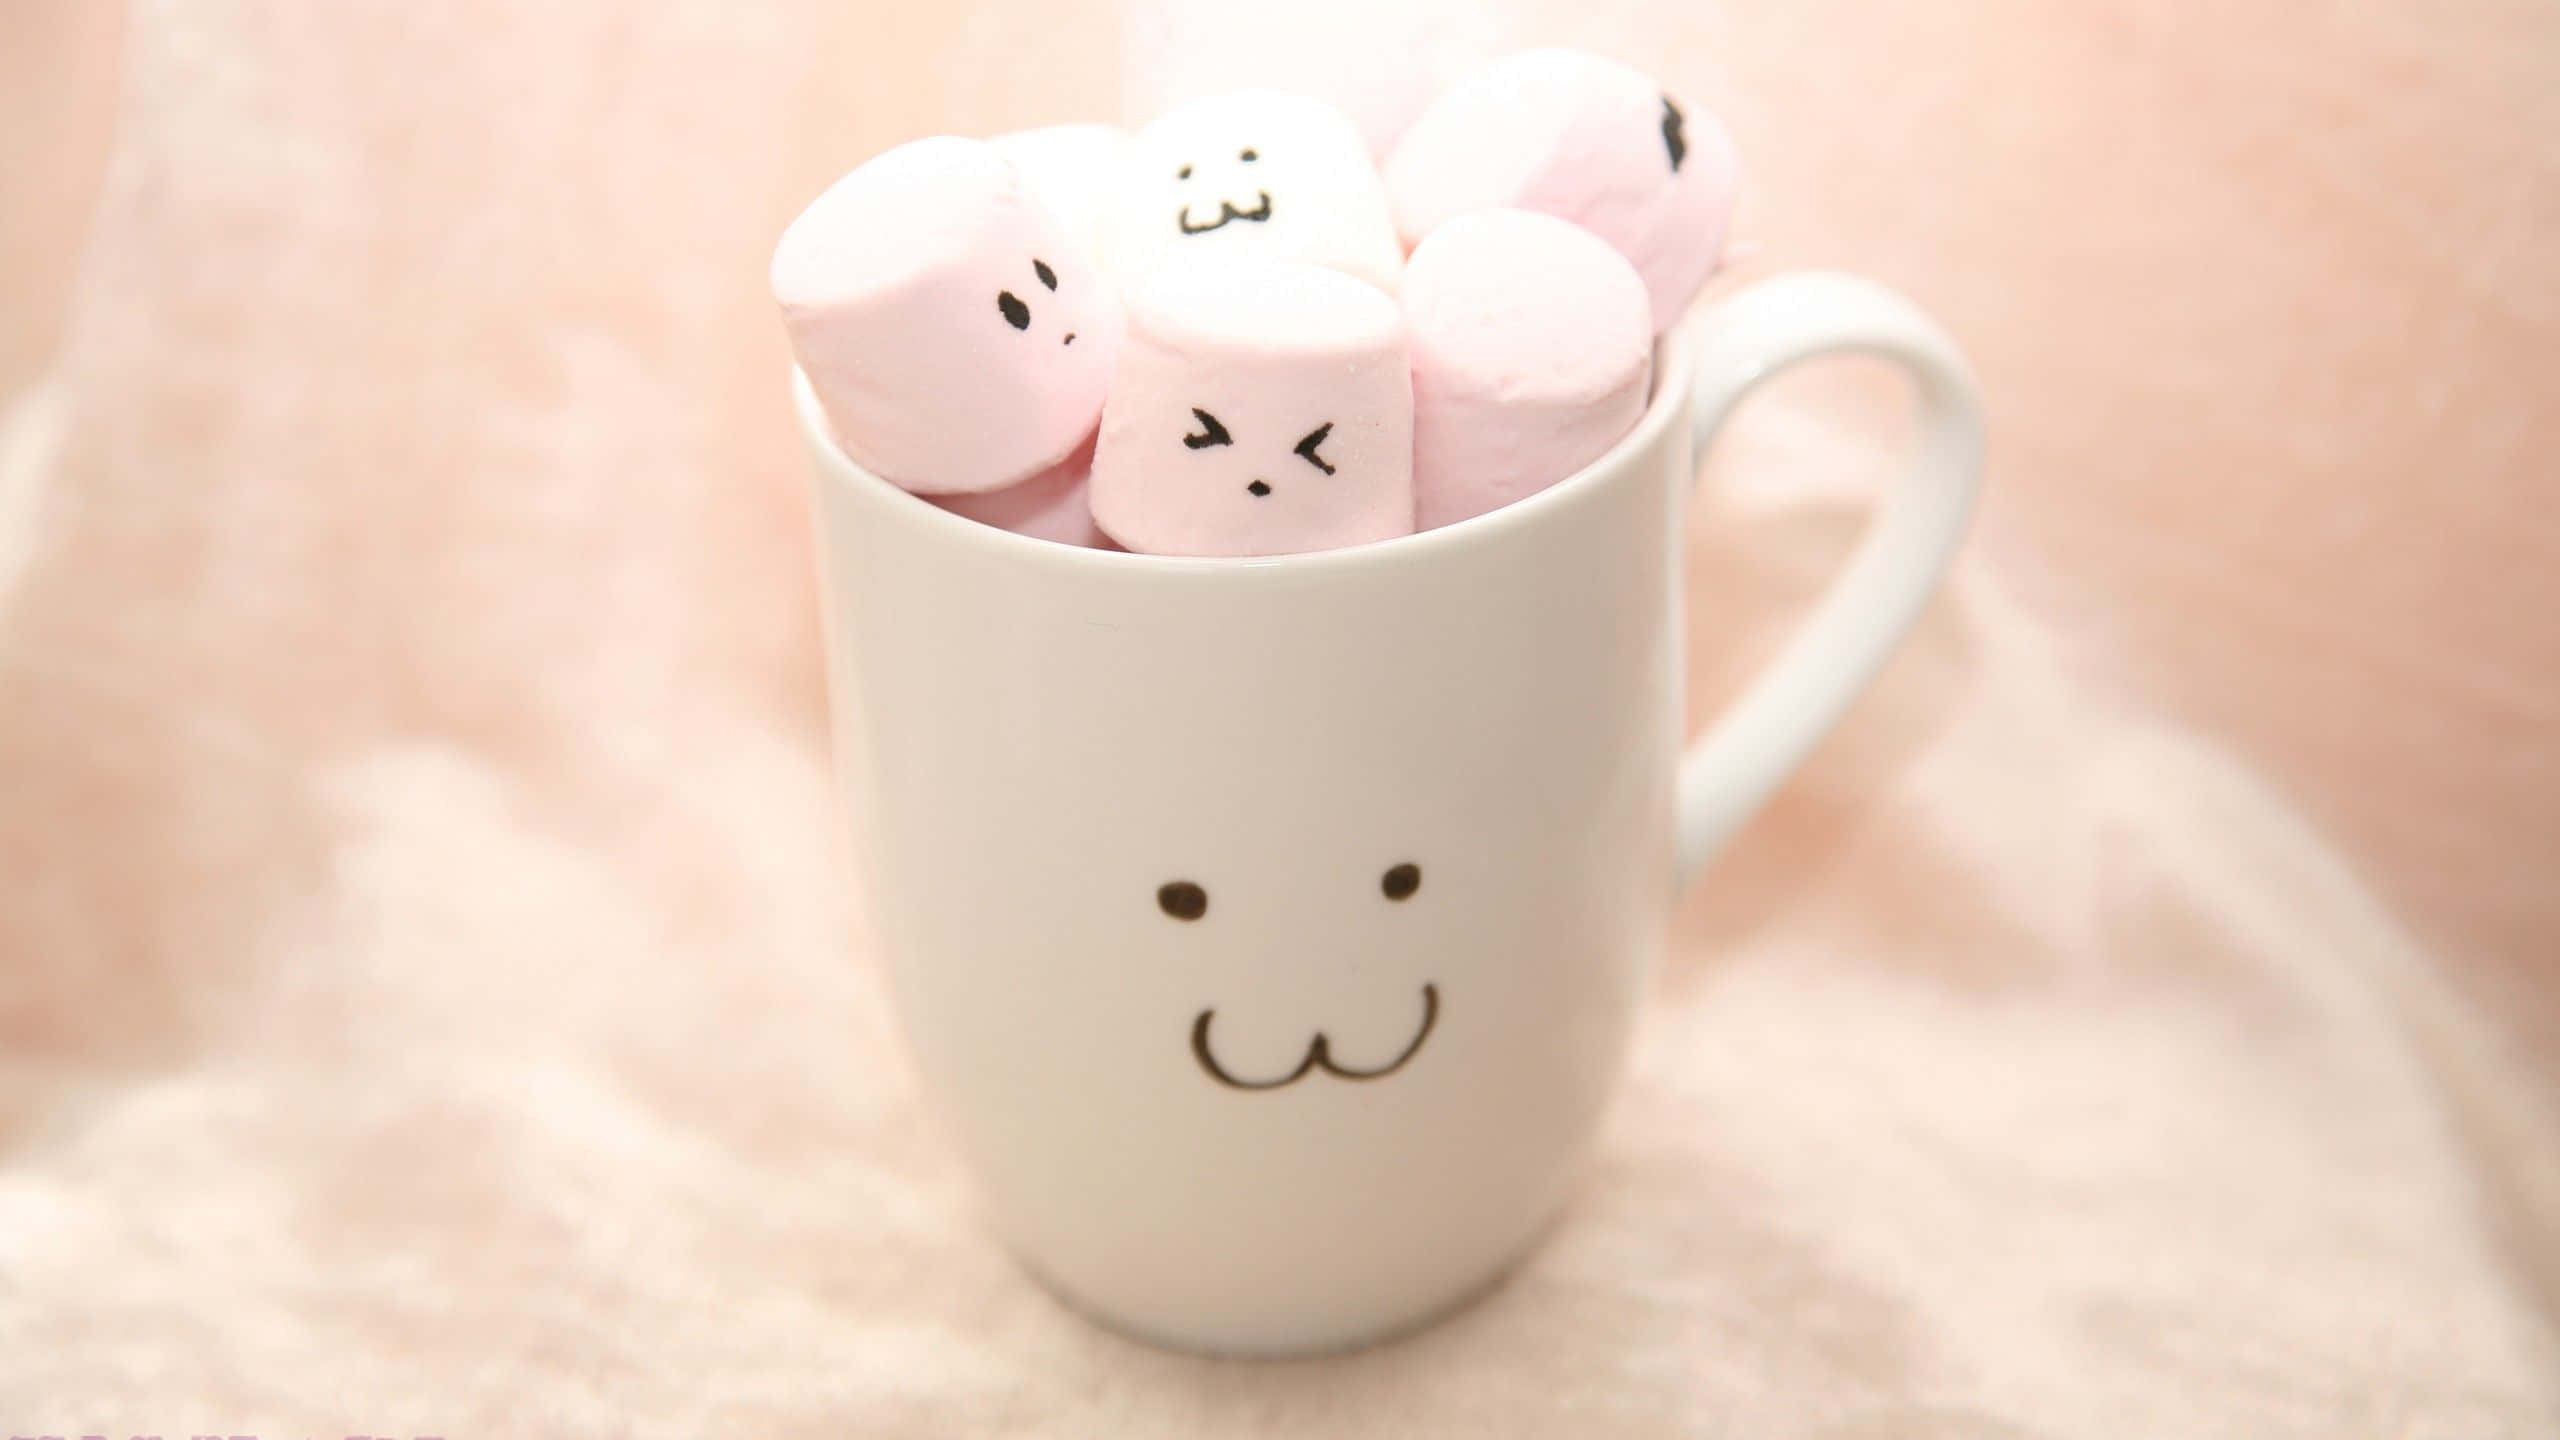 Adorable Assortment of Smiling Food Characters